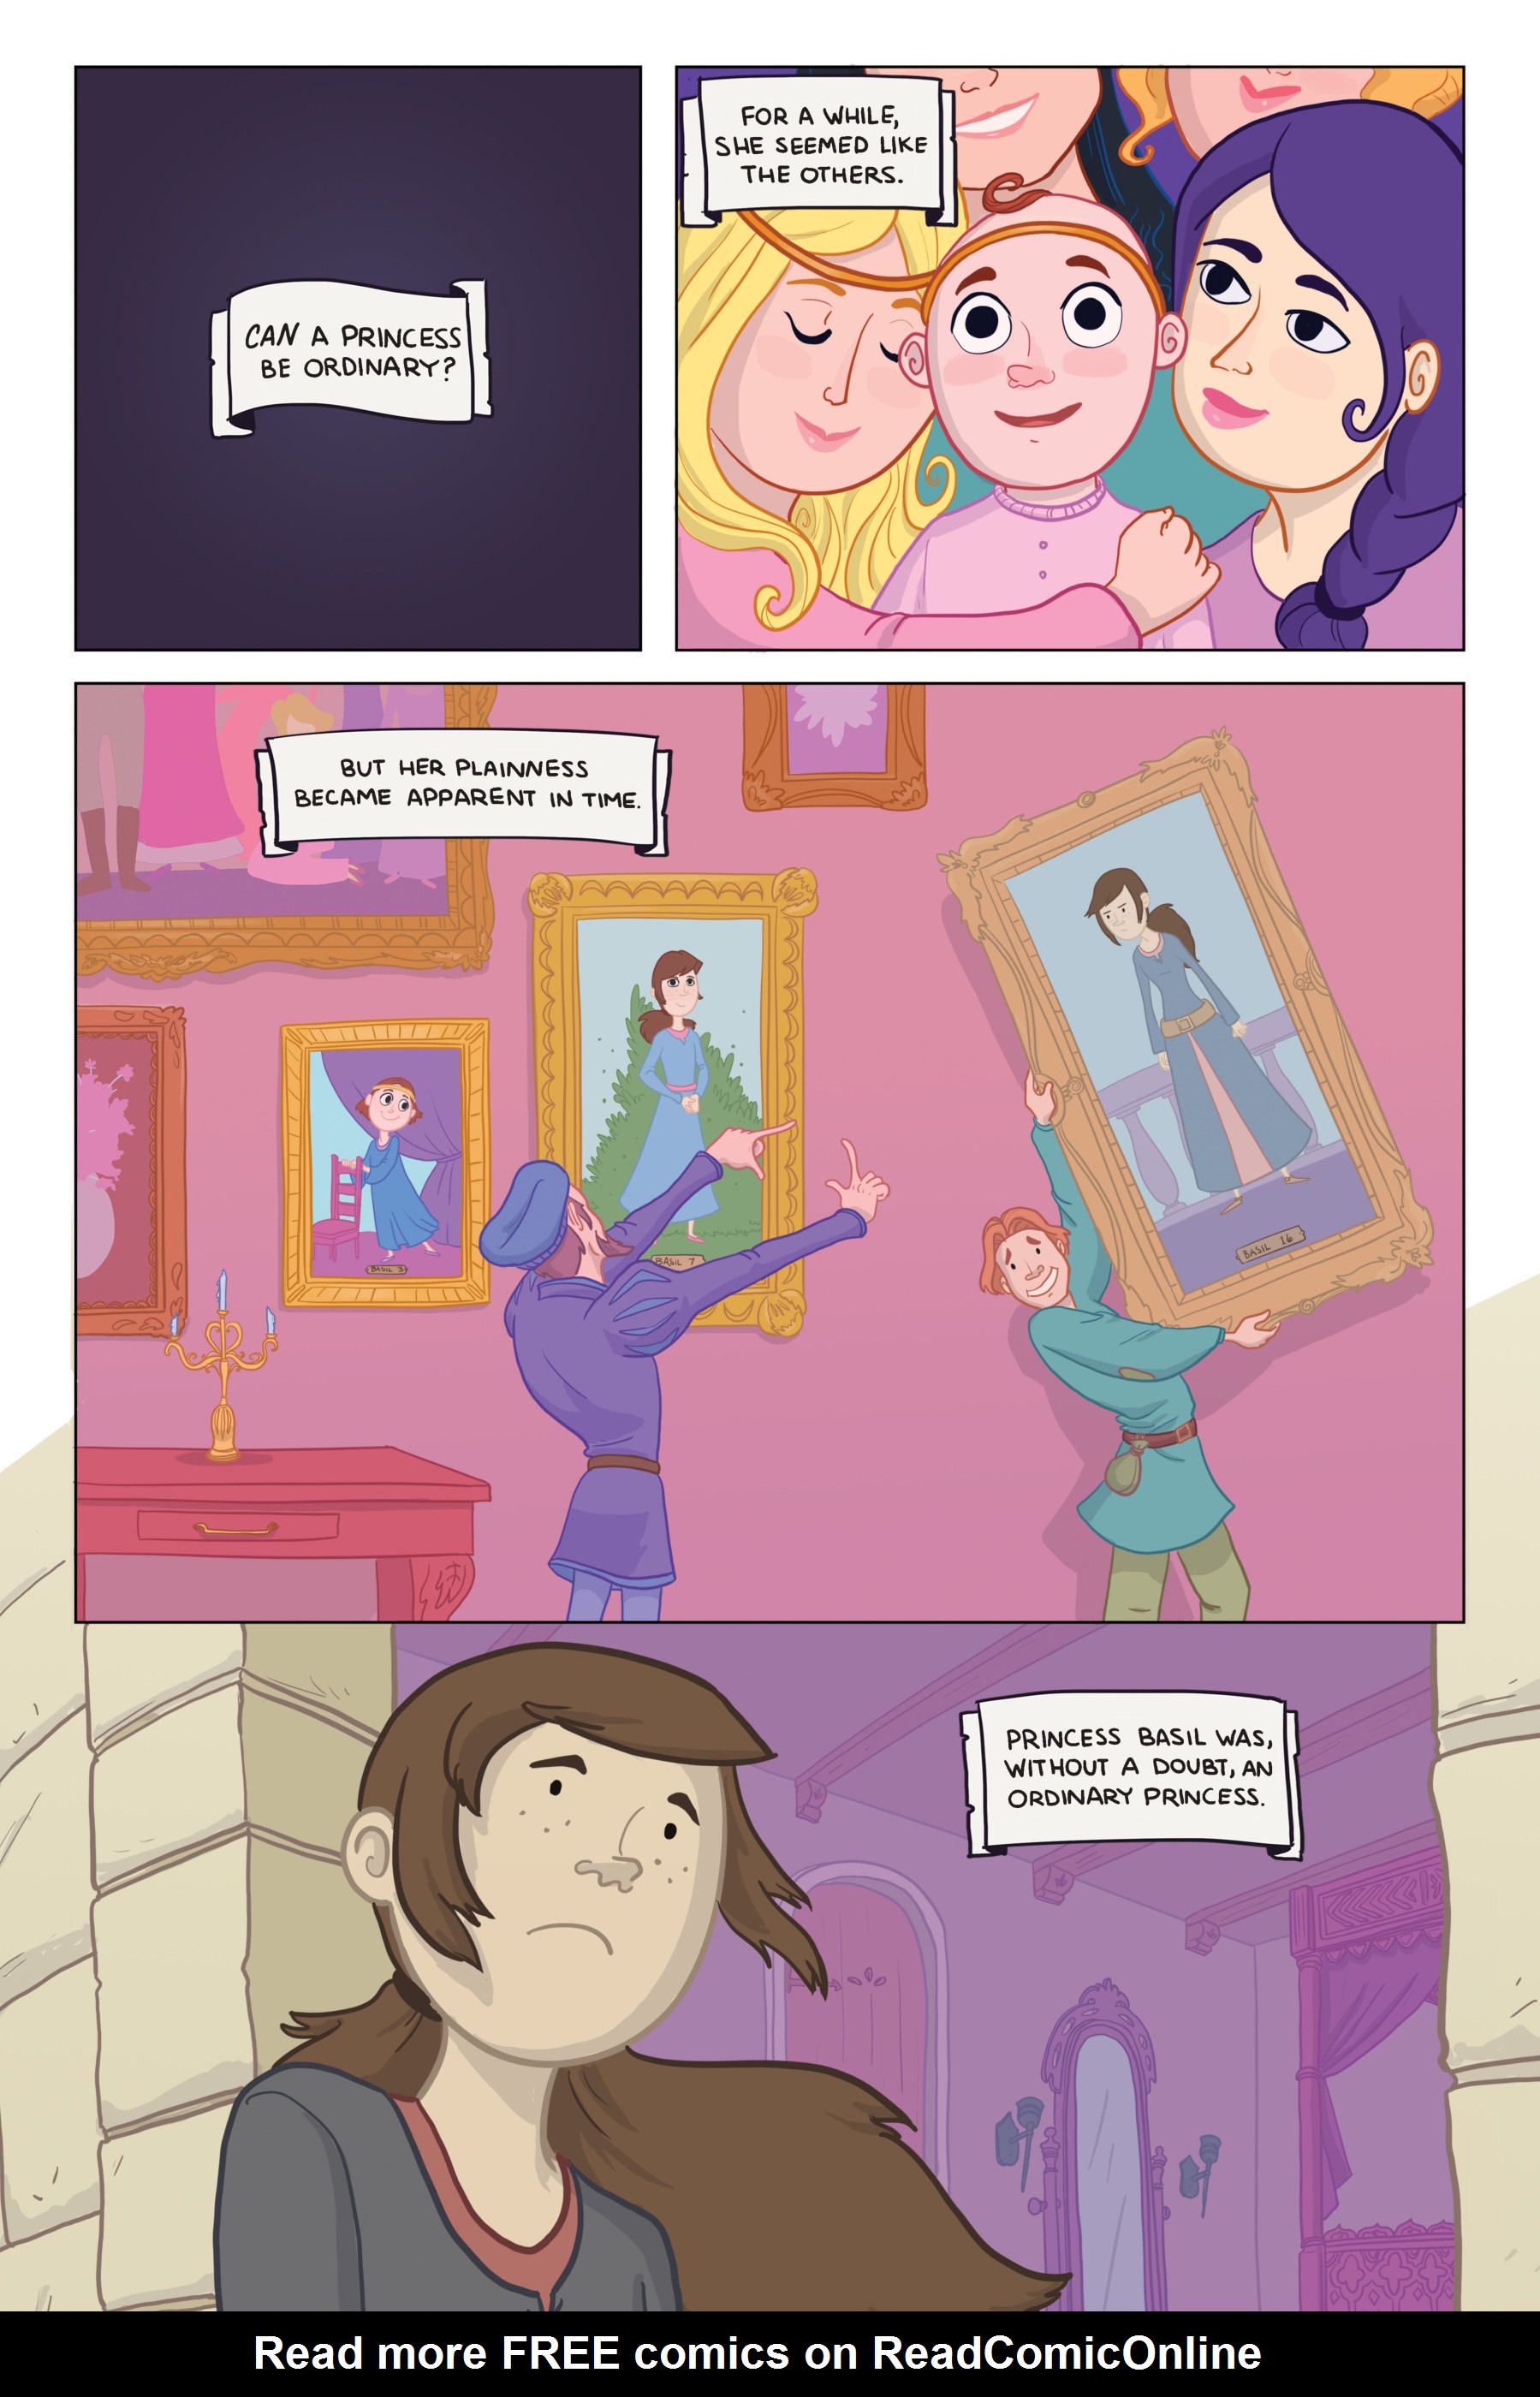 Read online Extraordinary: A Story of an Ordinary Princess comic -  Issue # TPB (Part 1) - 10